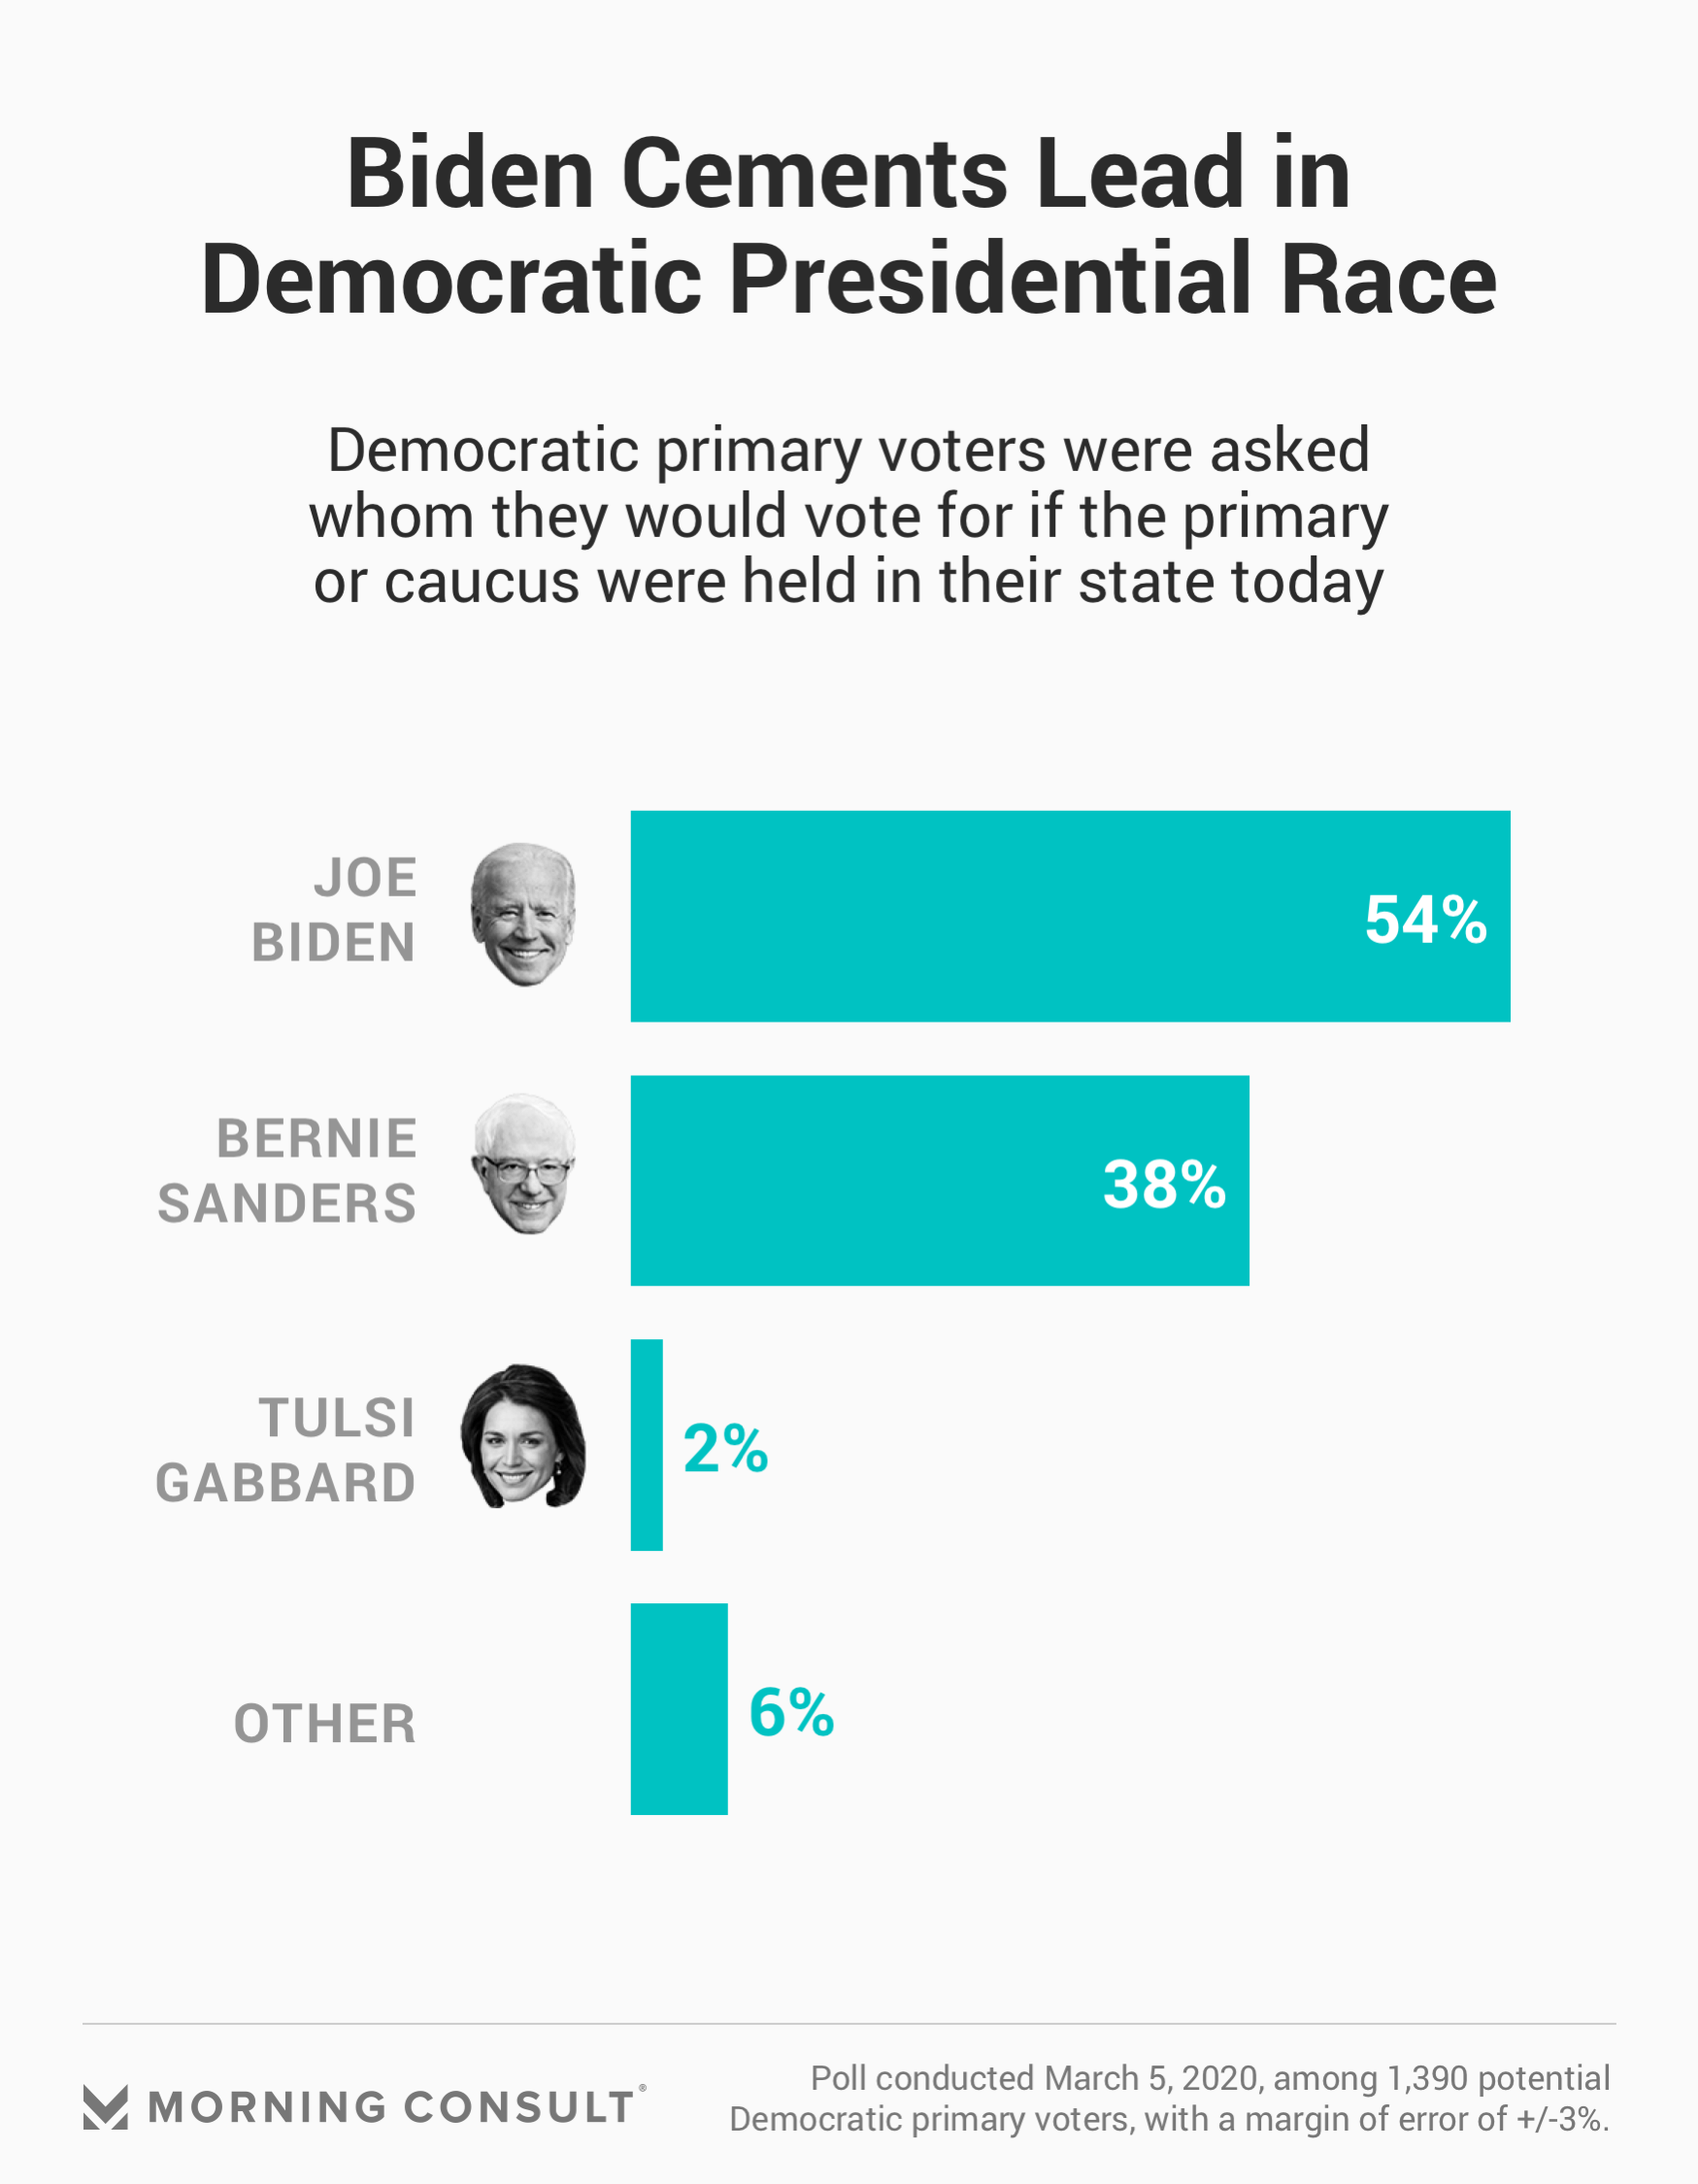 Biden 16-Point Lead Over Sanders in Presidential Race - Morning Consult